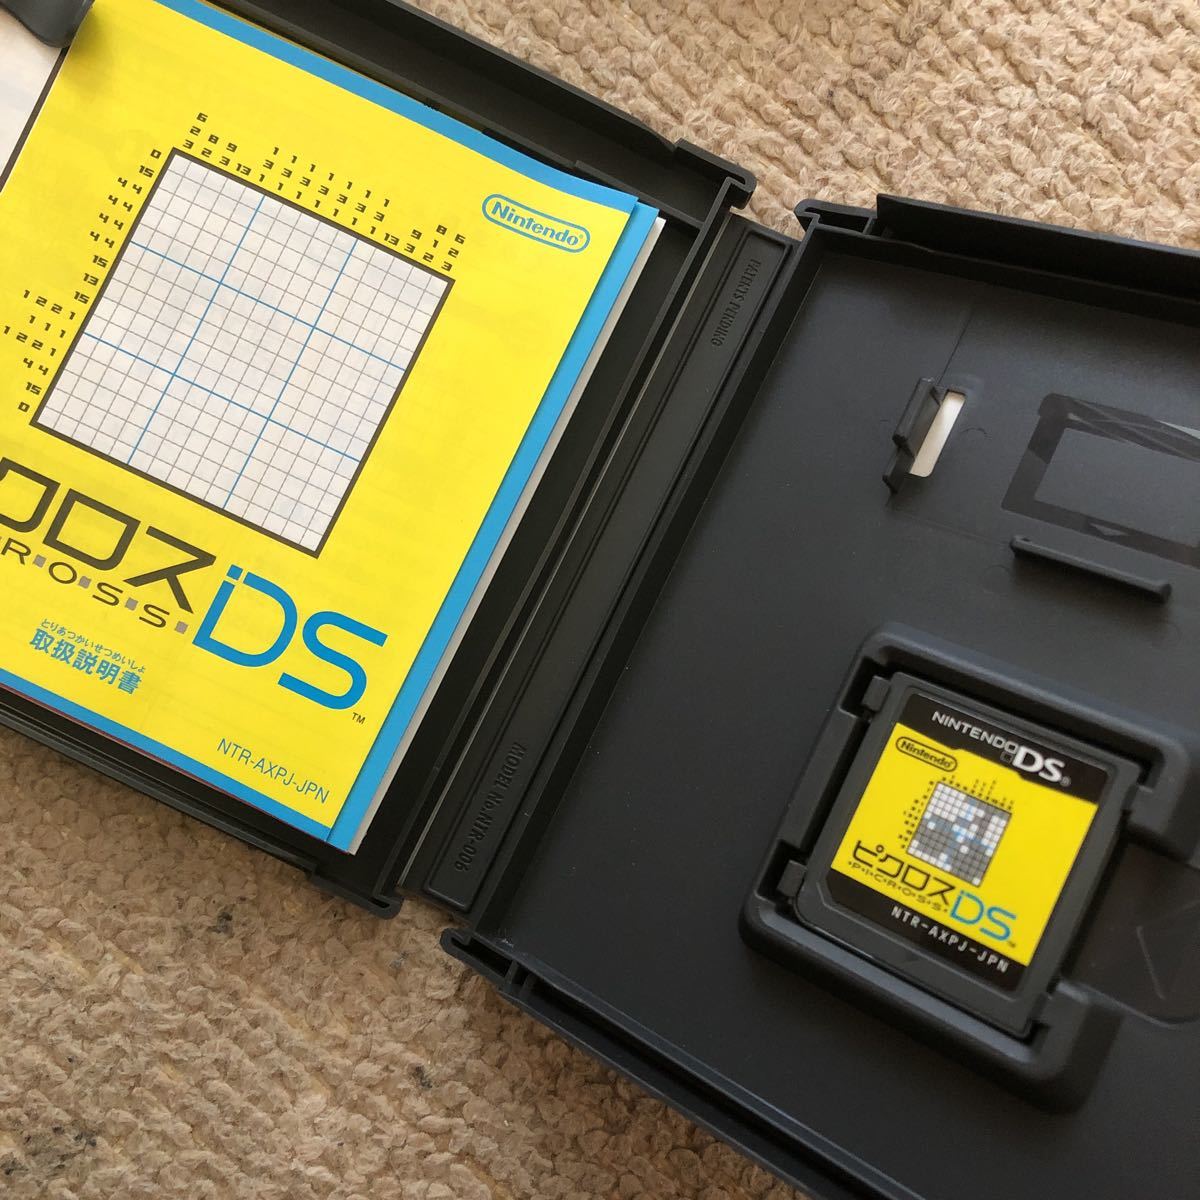 DSソフト ピクロスDS